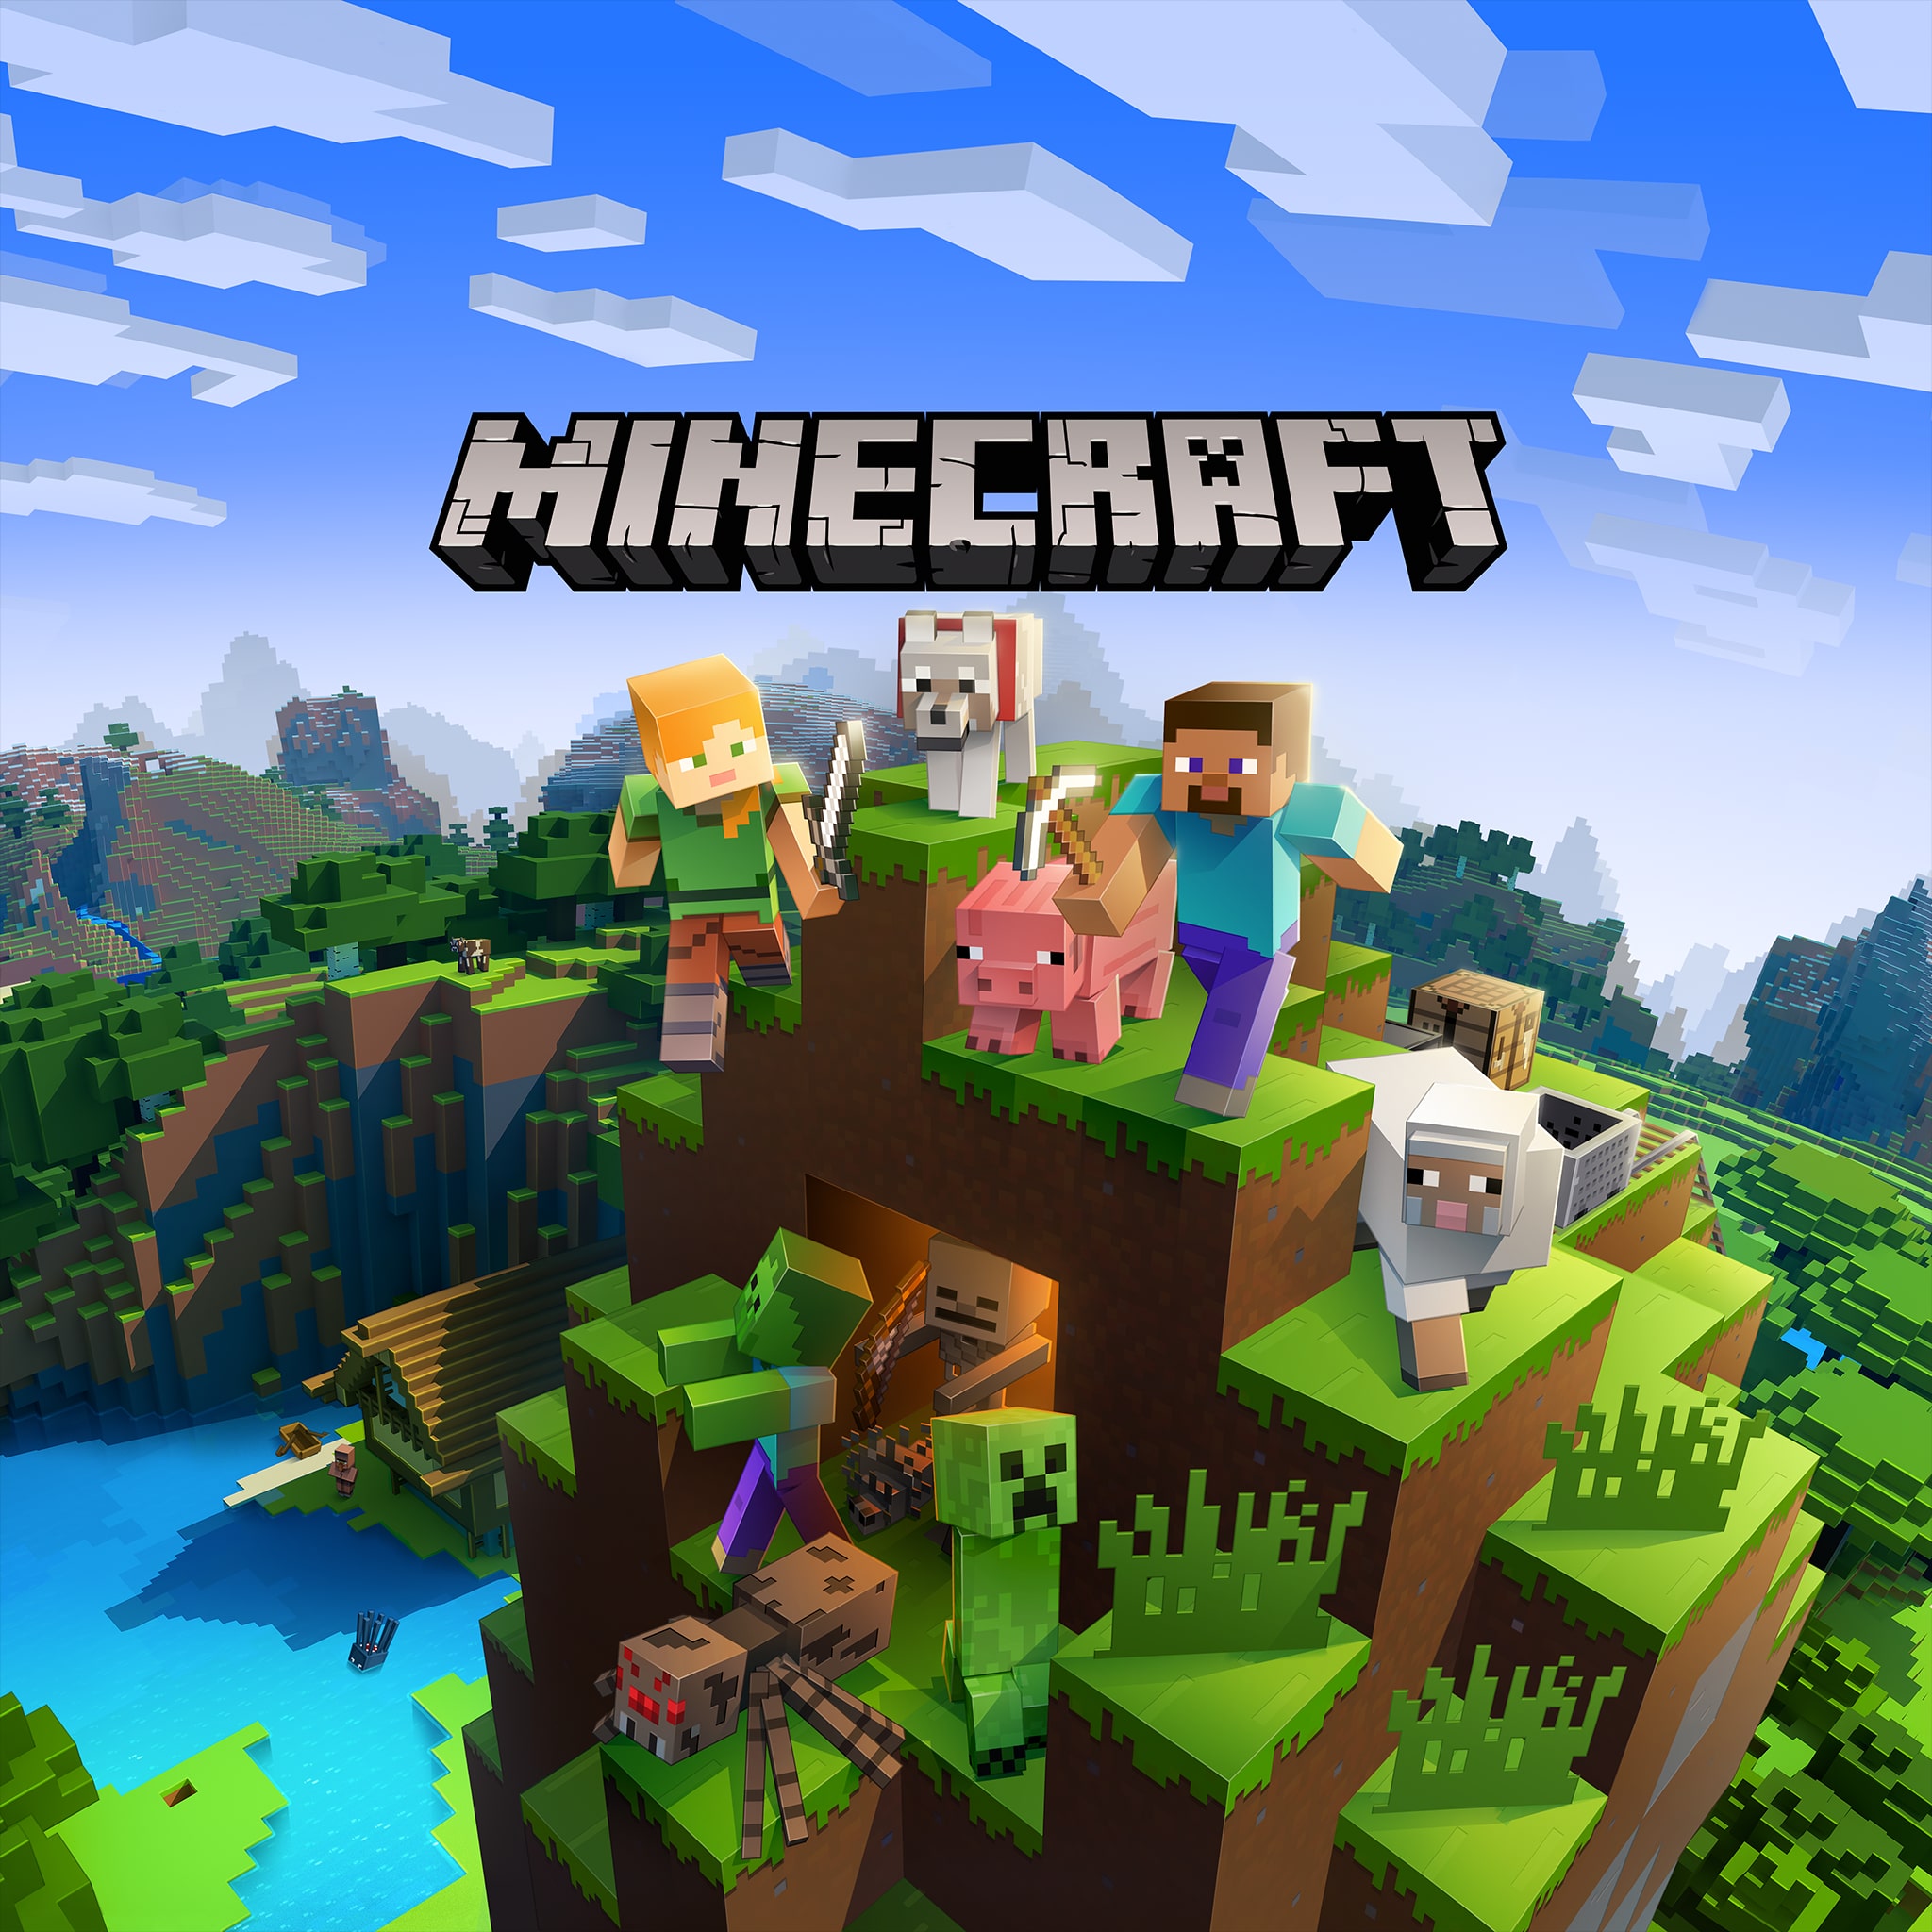 Minecraft
open world android games